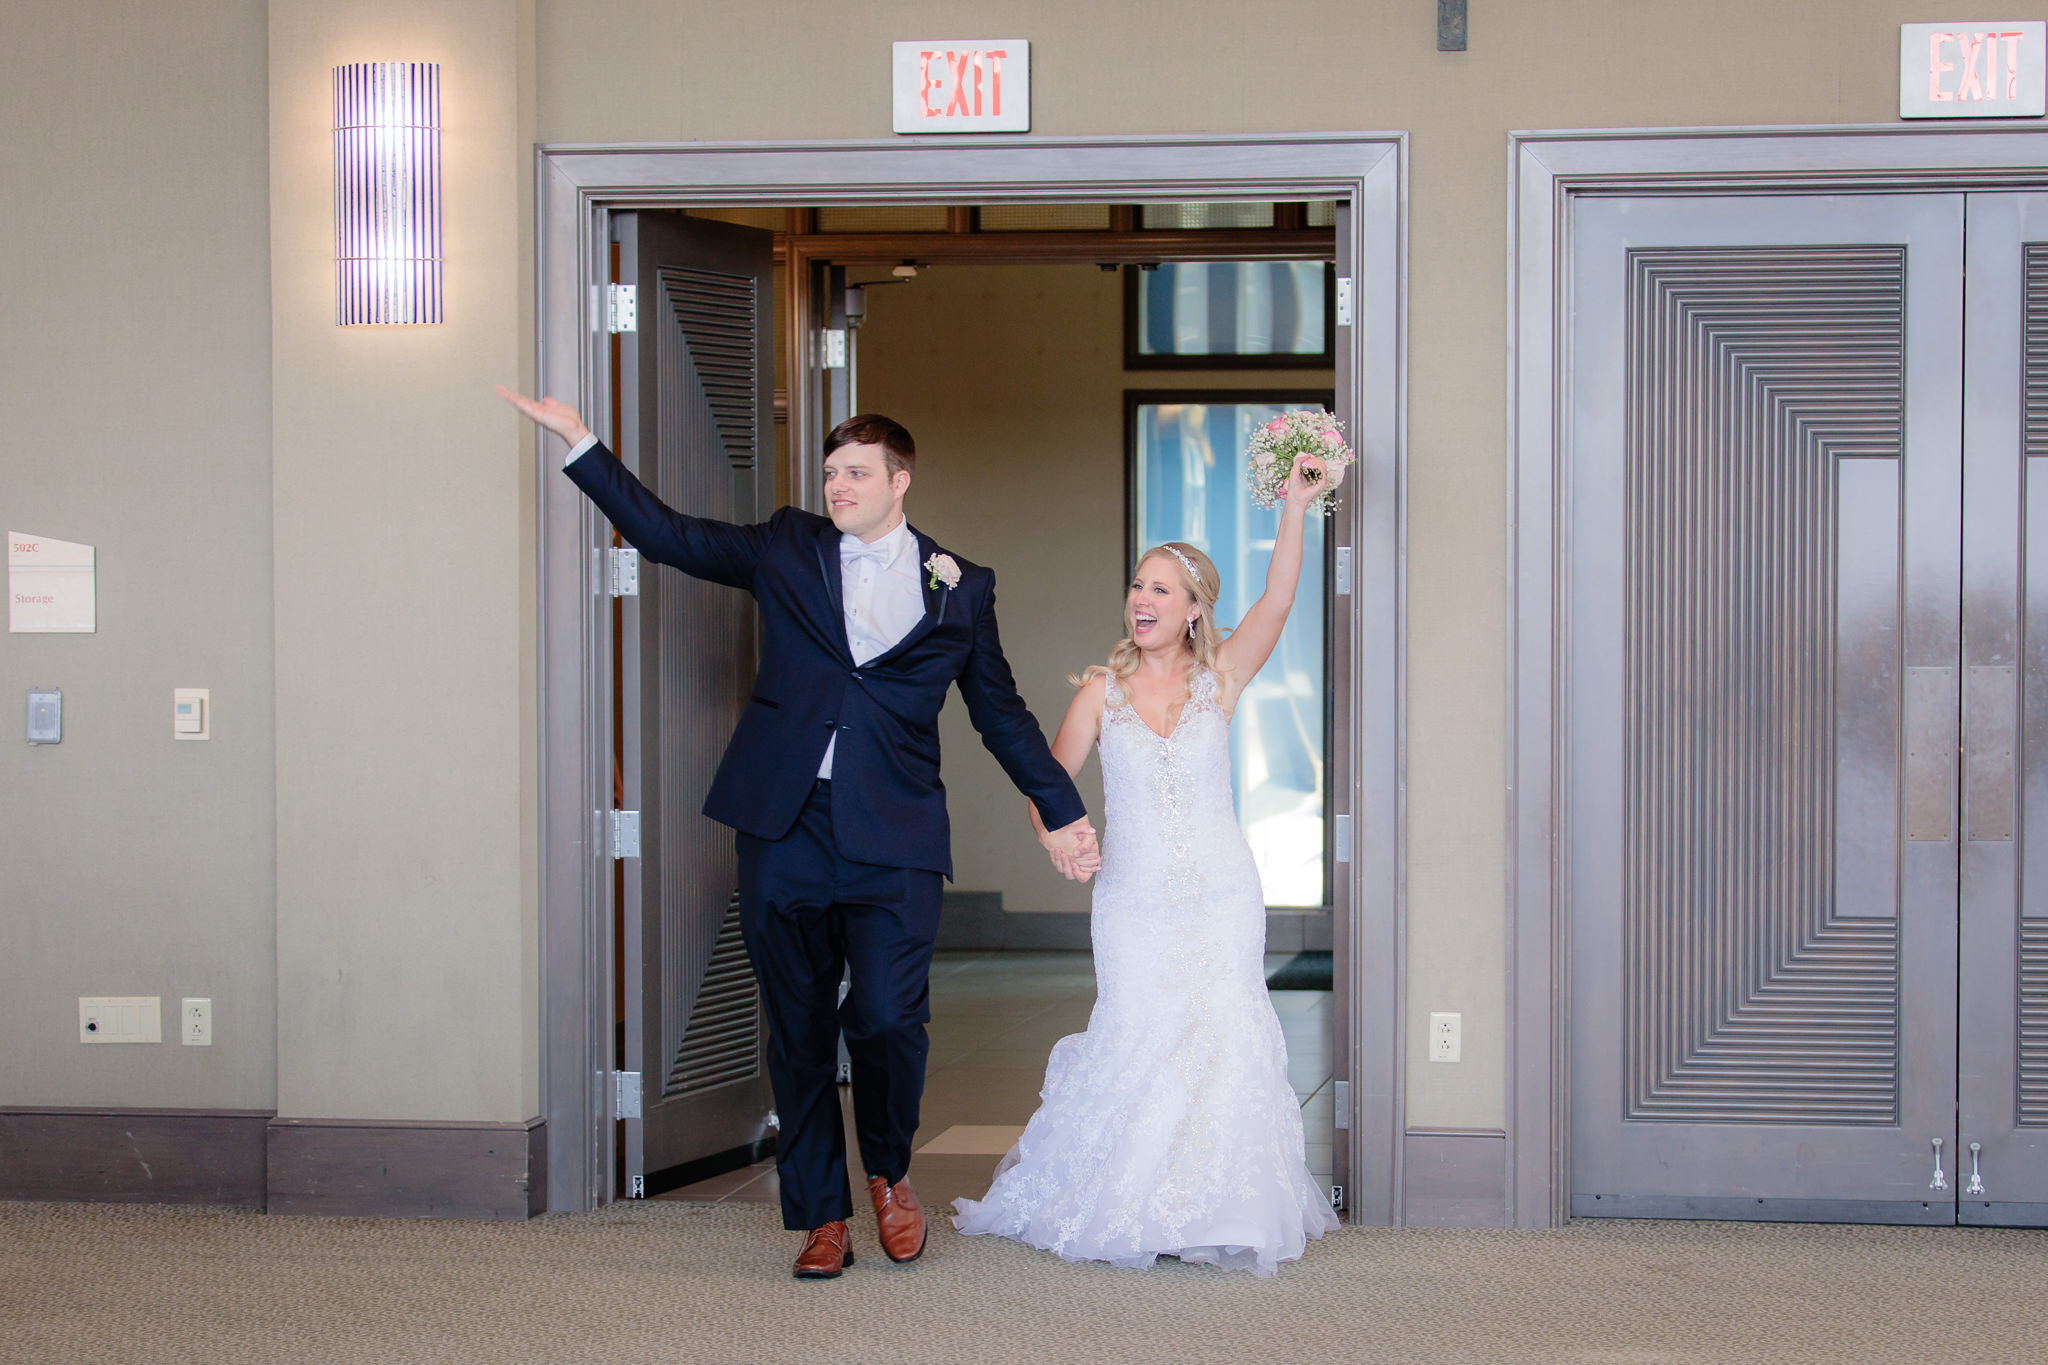 Newlyweds enter the Charles J. Dougherty ballroom for their reception at Duquesne University